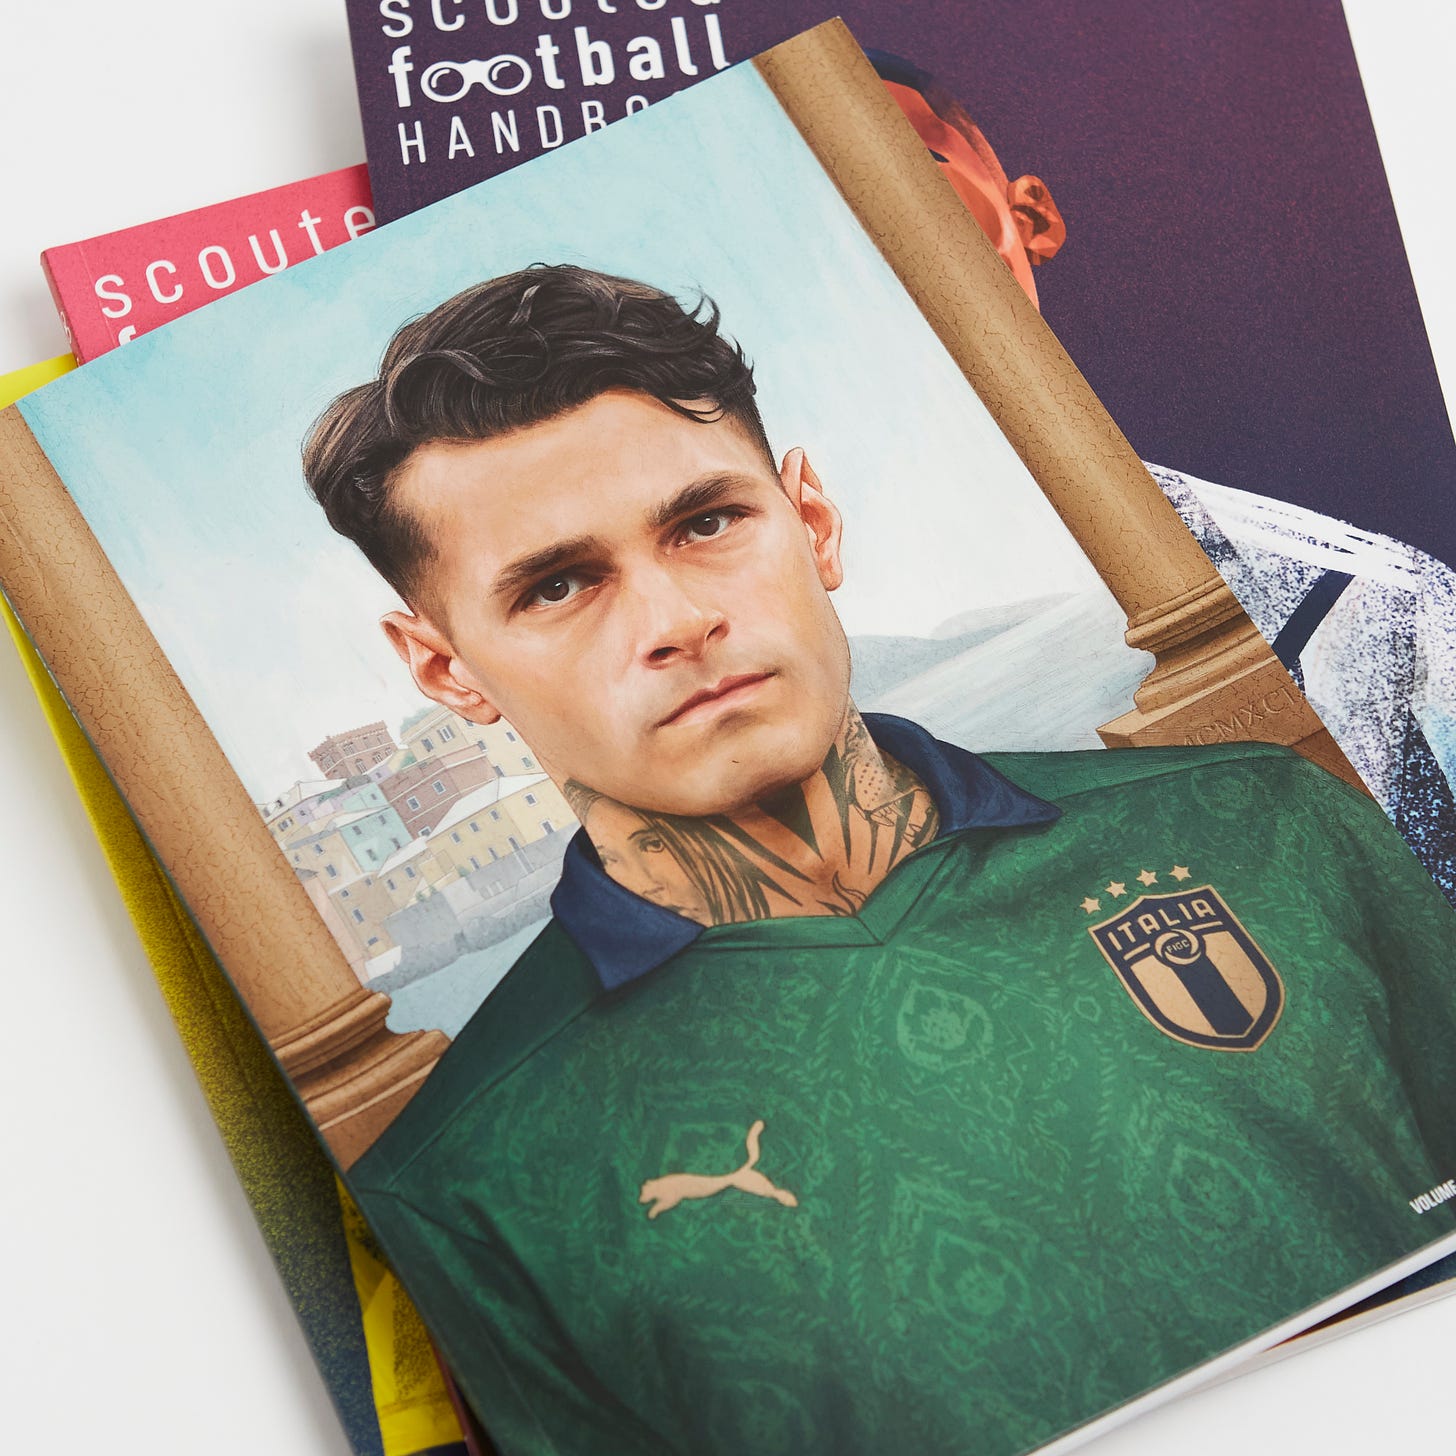 A close-up photo of a selection of classic Scouted Football Handbook editions, featuring a portrait photo of Gianluca Scamacca in a renaissance-inspired Italy kit